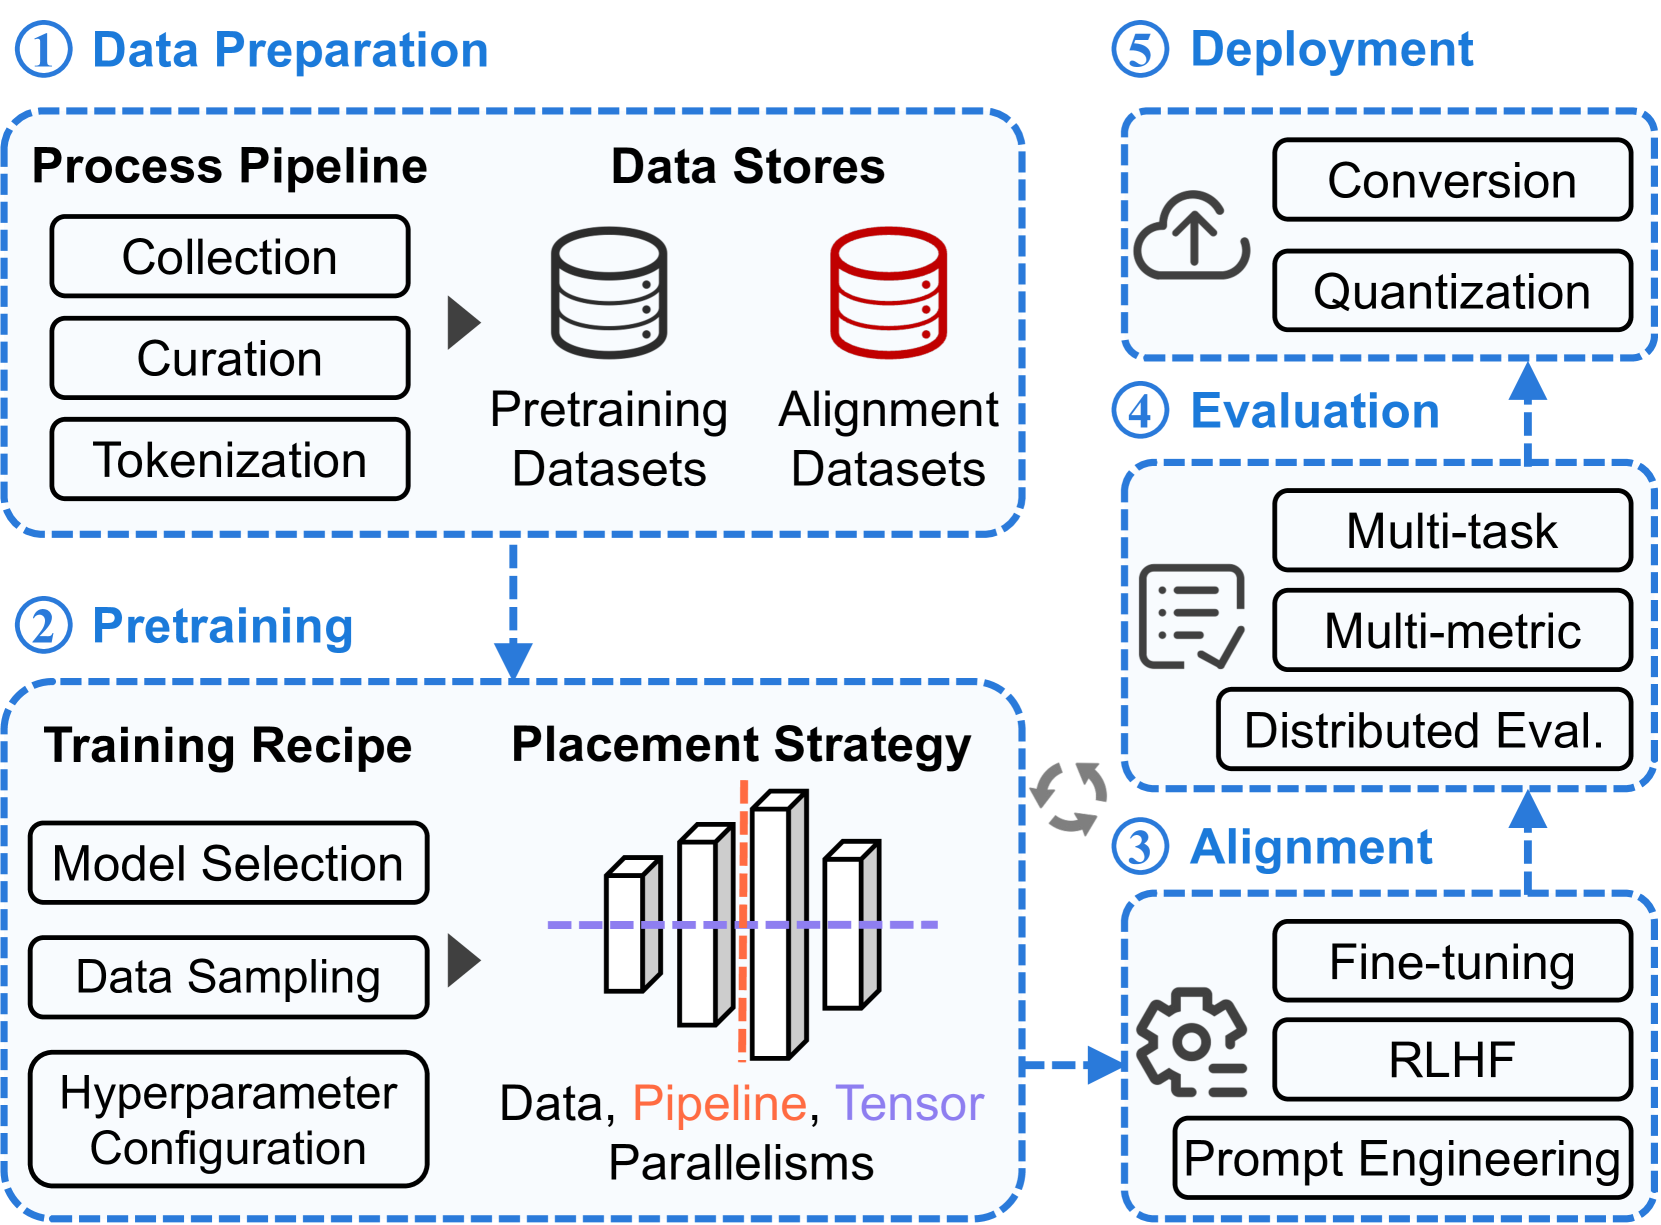 Characterization of Large Language Model Development in the Datacenter